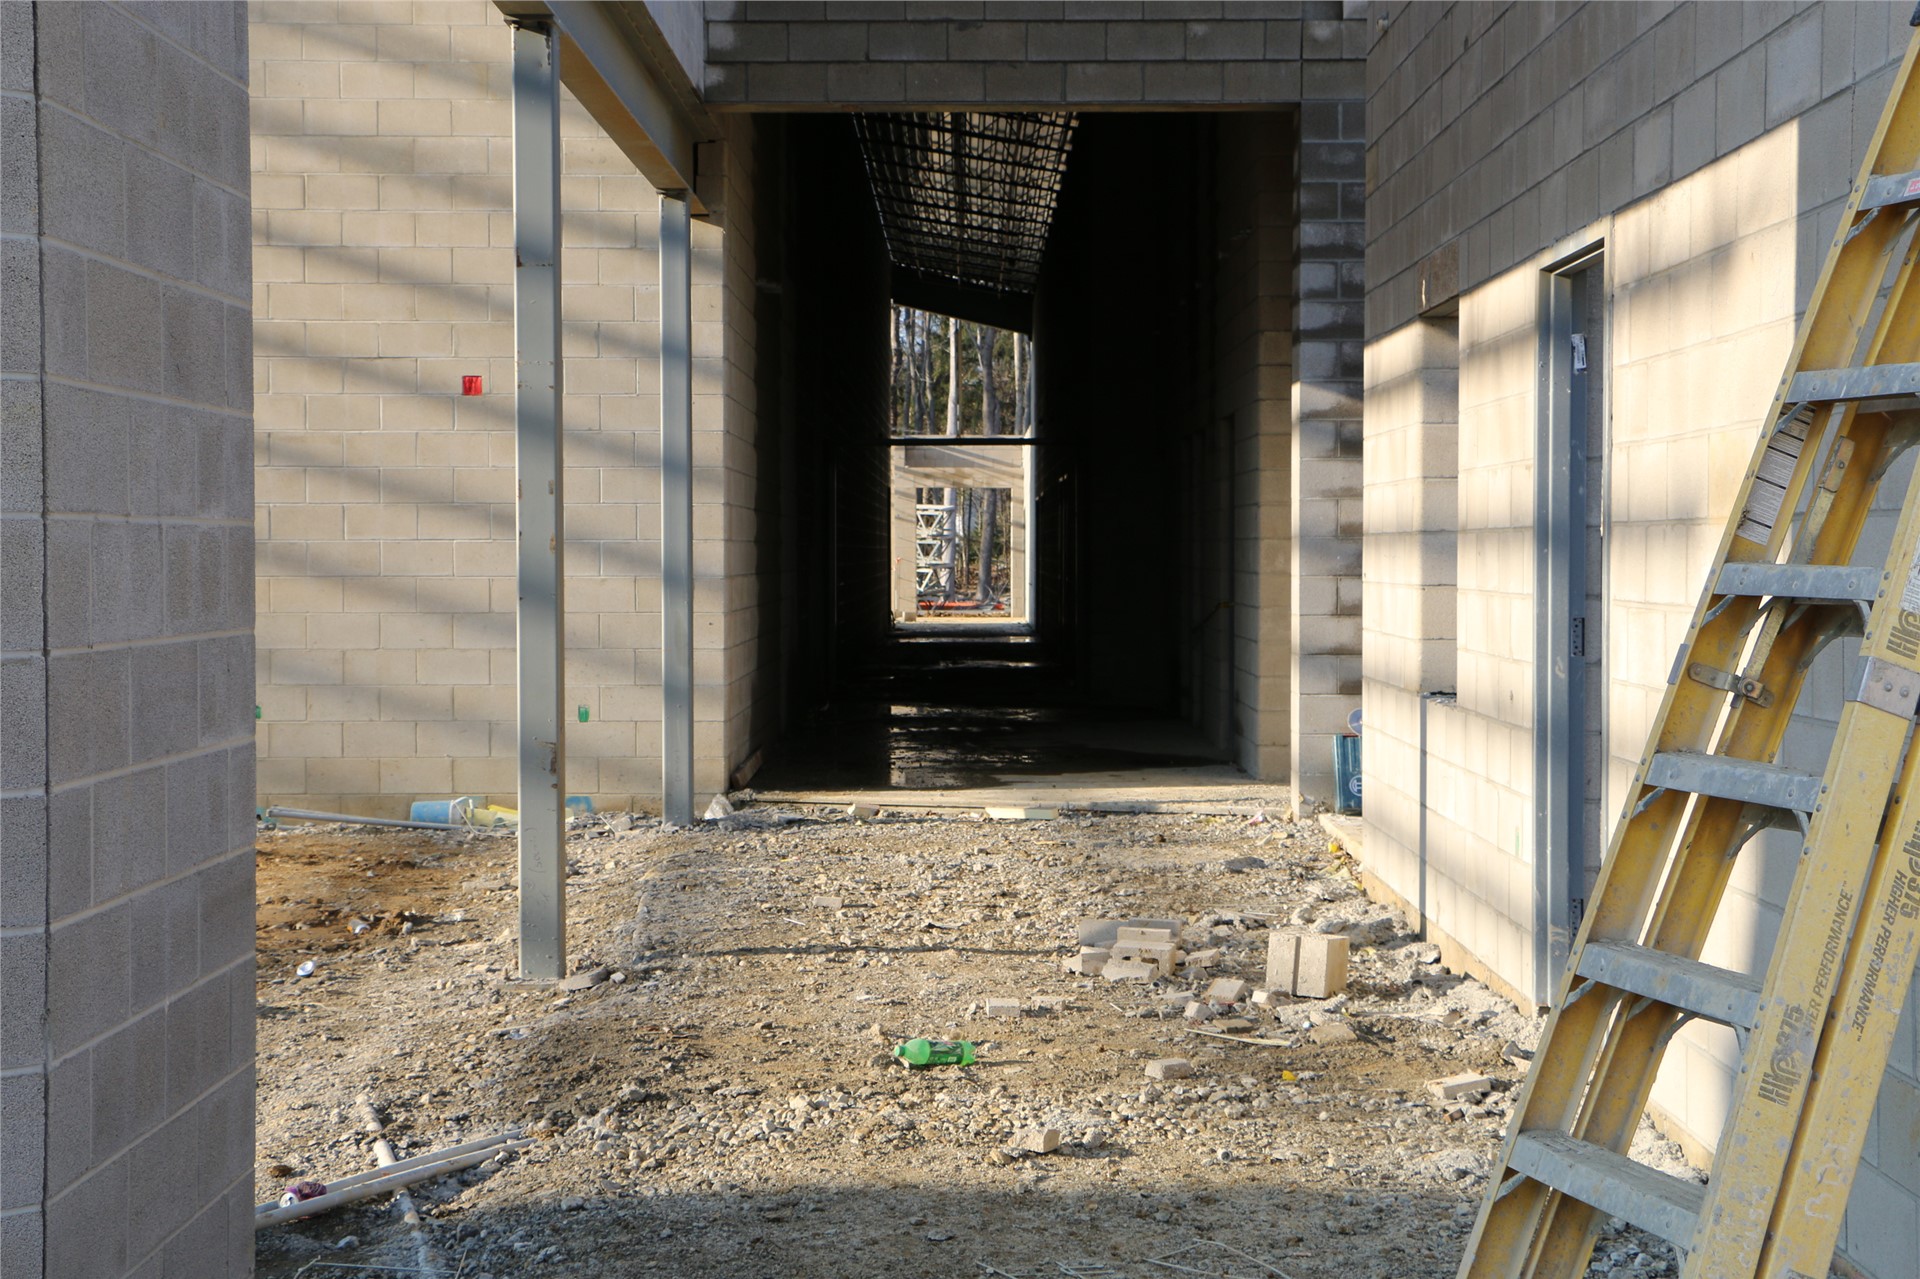 Corridor between the gymnasium and health/physical education classrooms